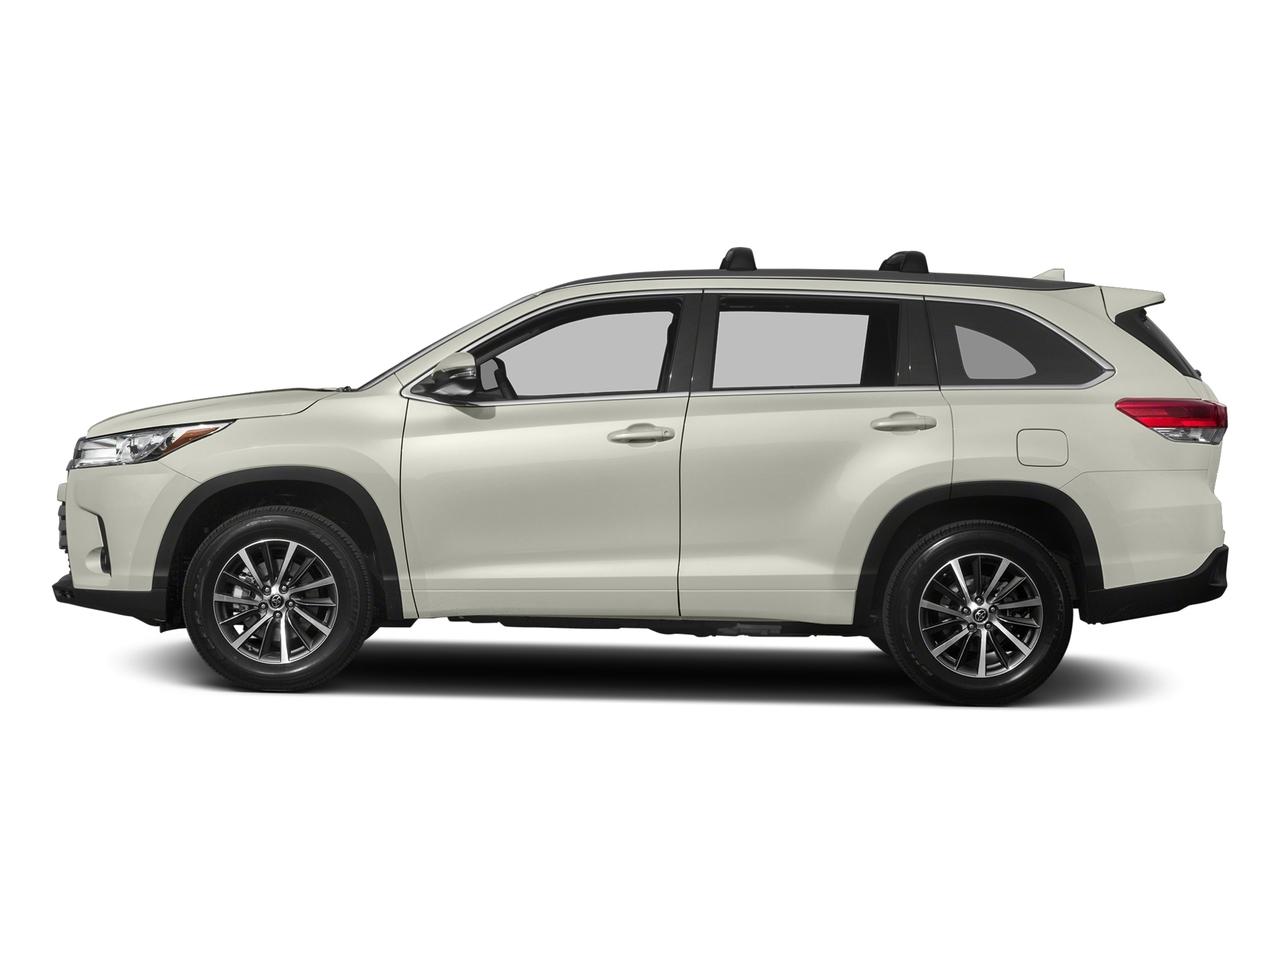 Used 2017 Toyota Highlander XLE with VIN 5TDJZRFH2HS517272 for sale in White Hall, AR